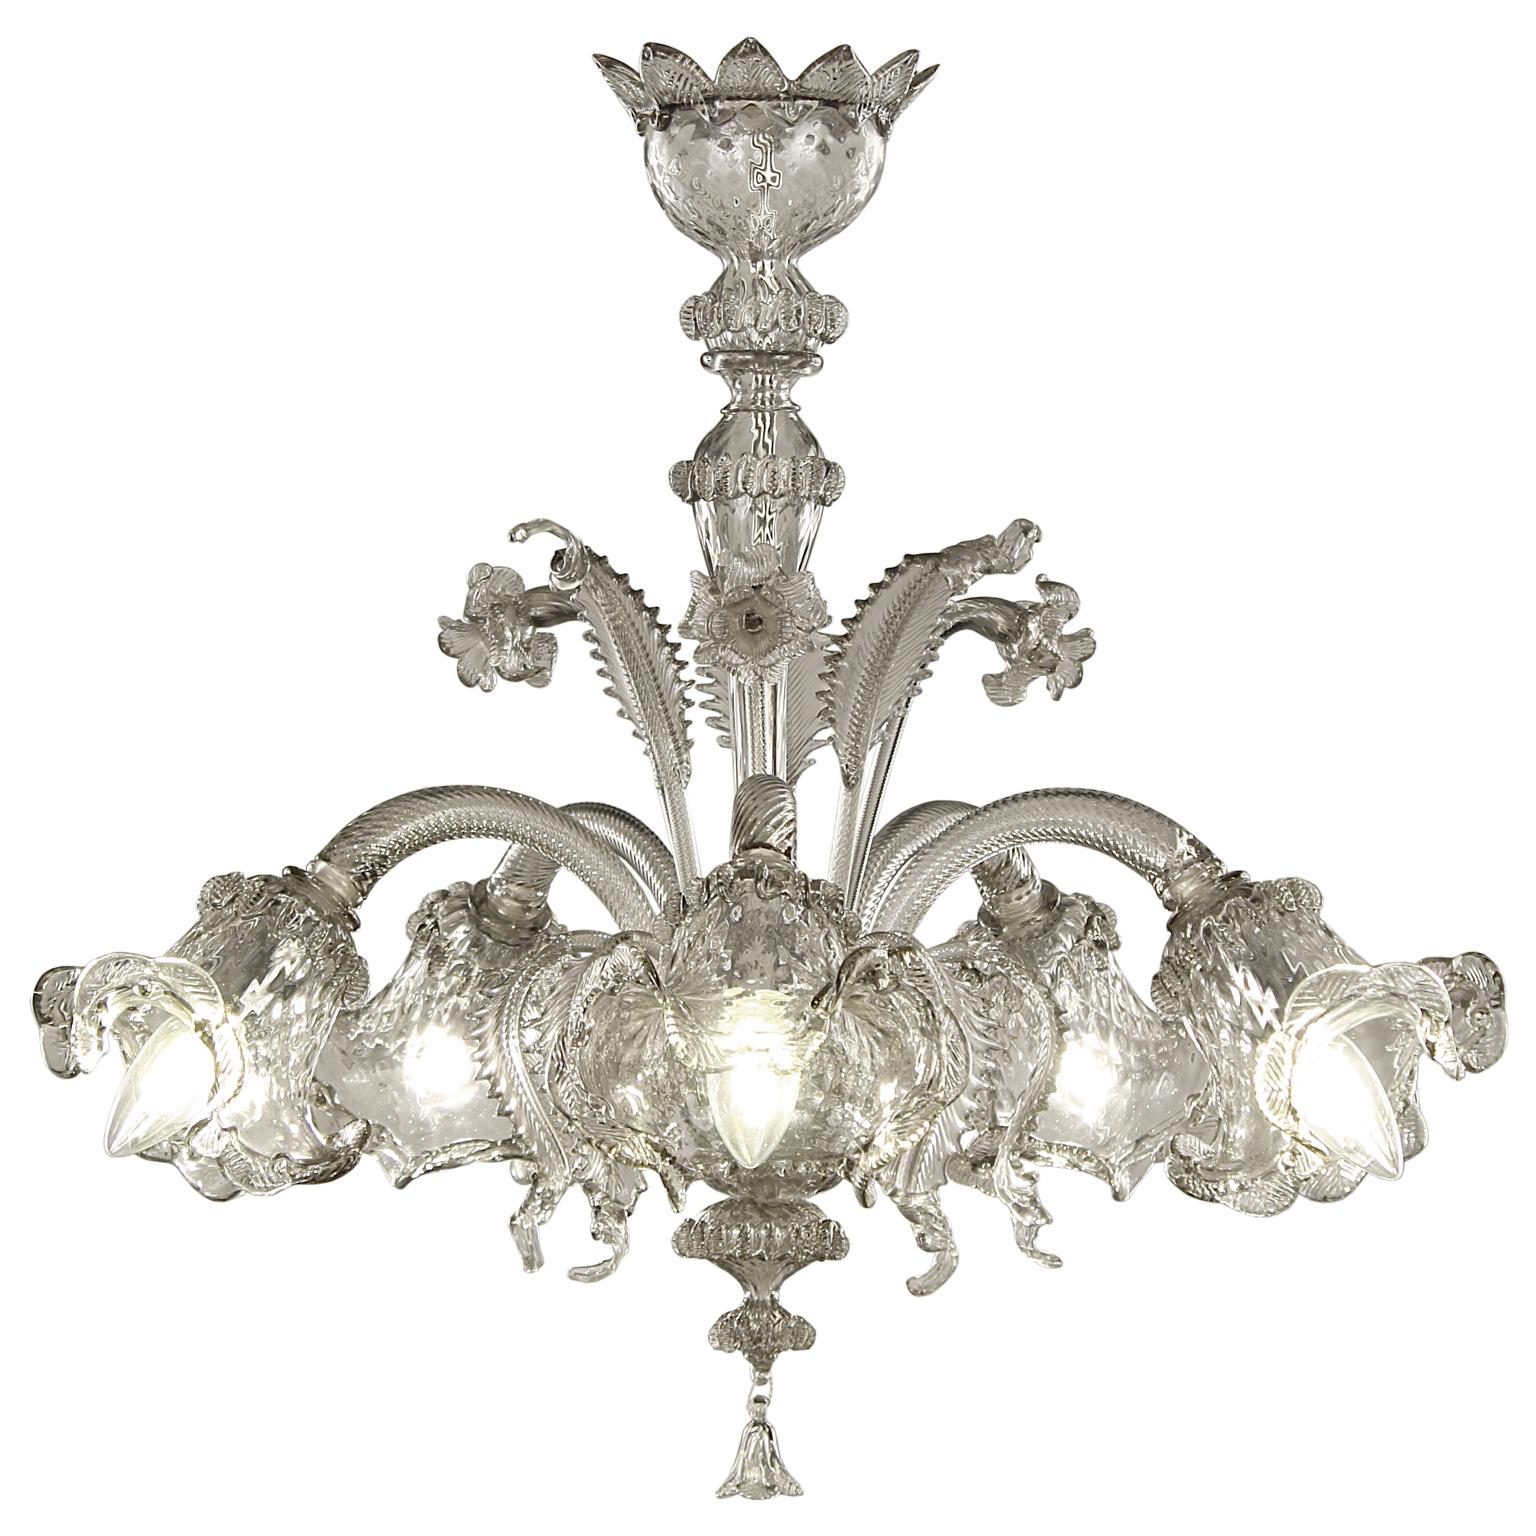 V Classic 900 chandelier, 5 lights, light grey Murano glass, clear details
This Murano glass chandelier has downward lights version.
The different colour solutions allow to meet the requirements of many different projects. Moreover, a wide range of